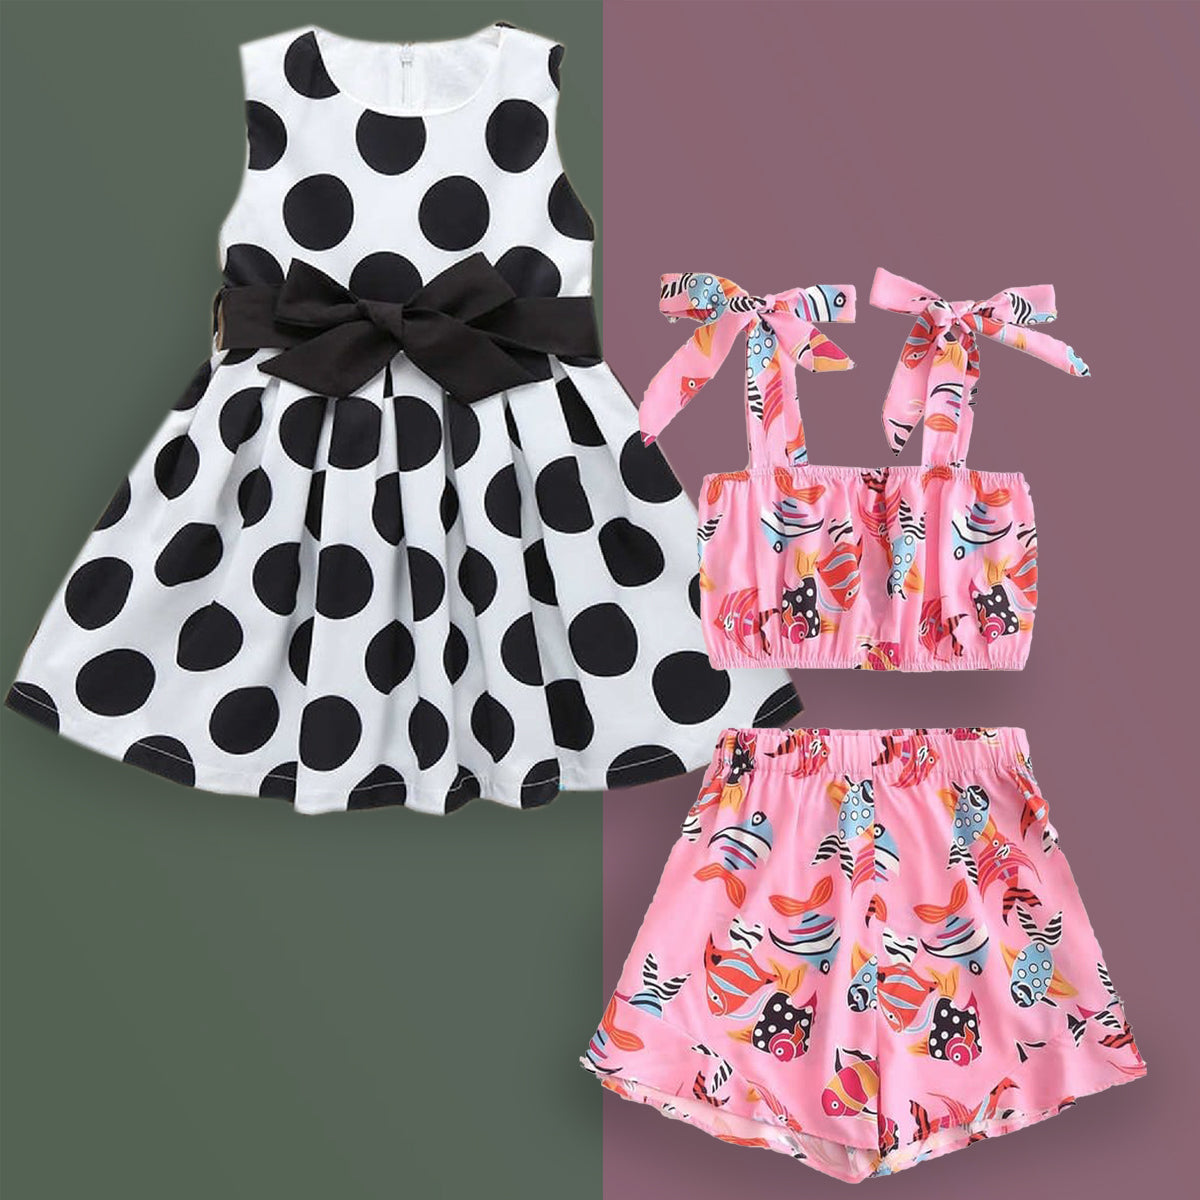 Stylish Looking Designer Pink Fish & Black_White Dot Top Dresses (Combo Pack Of 2) for Kids.